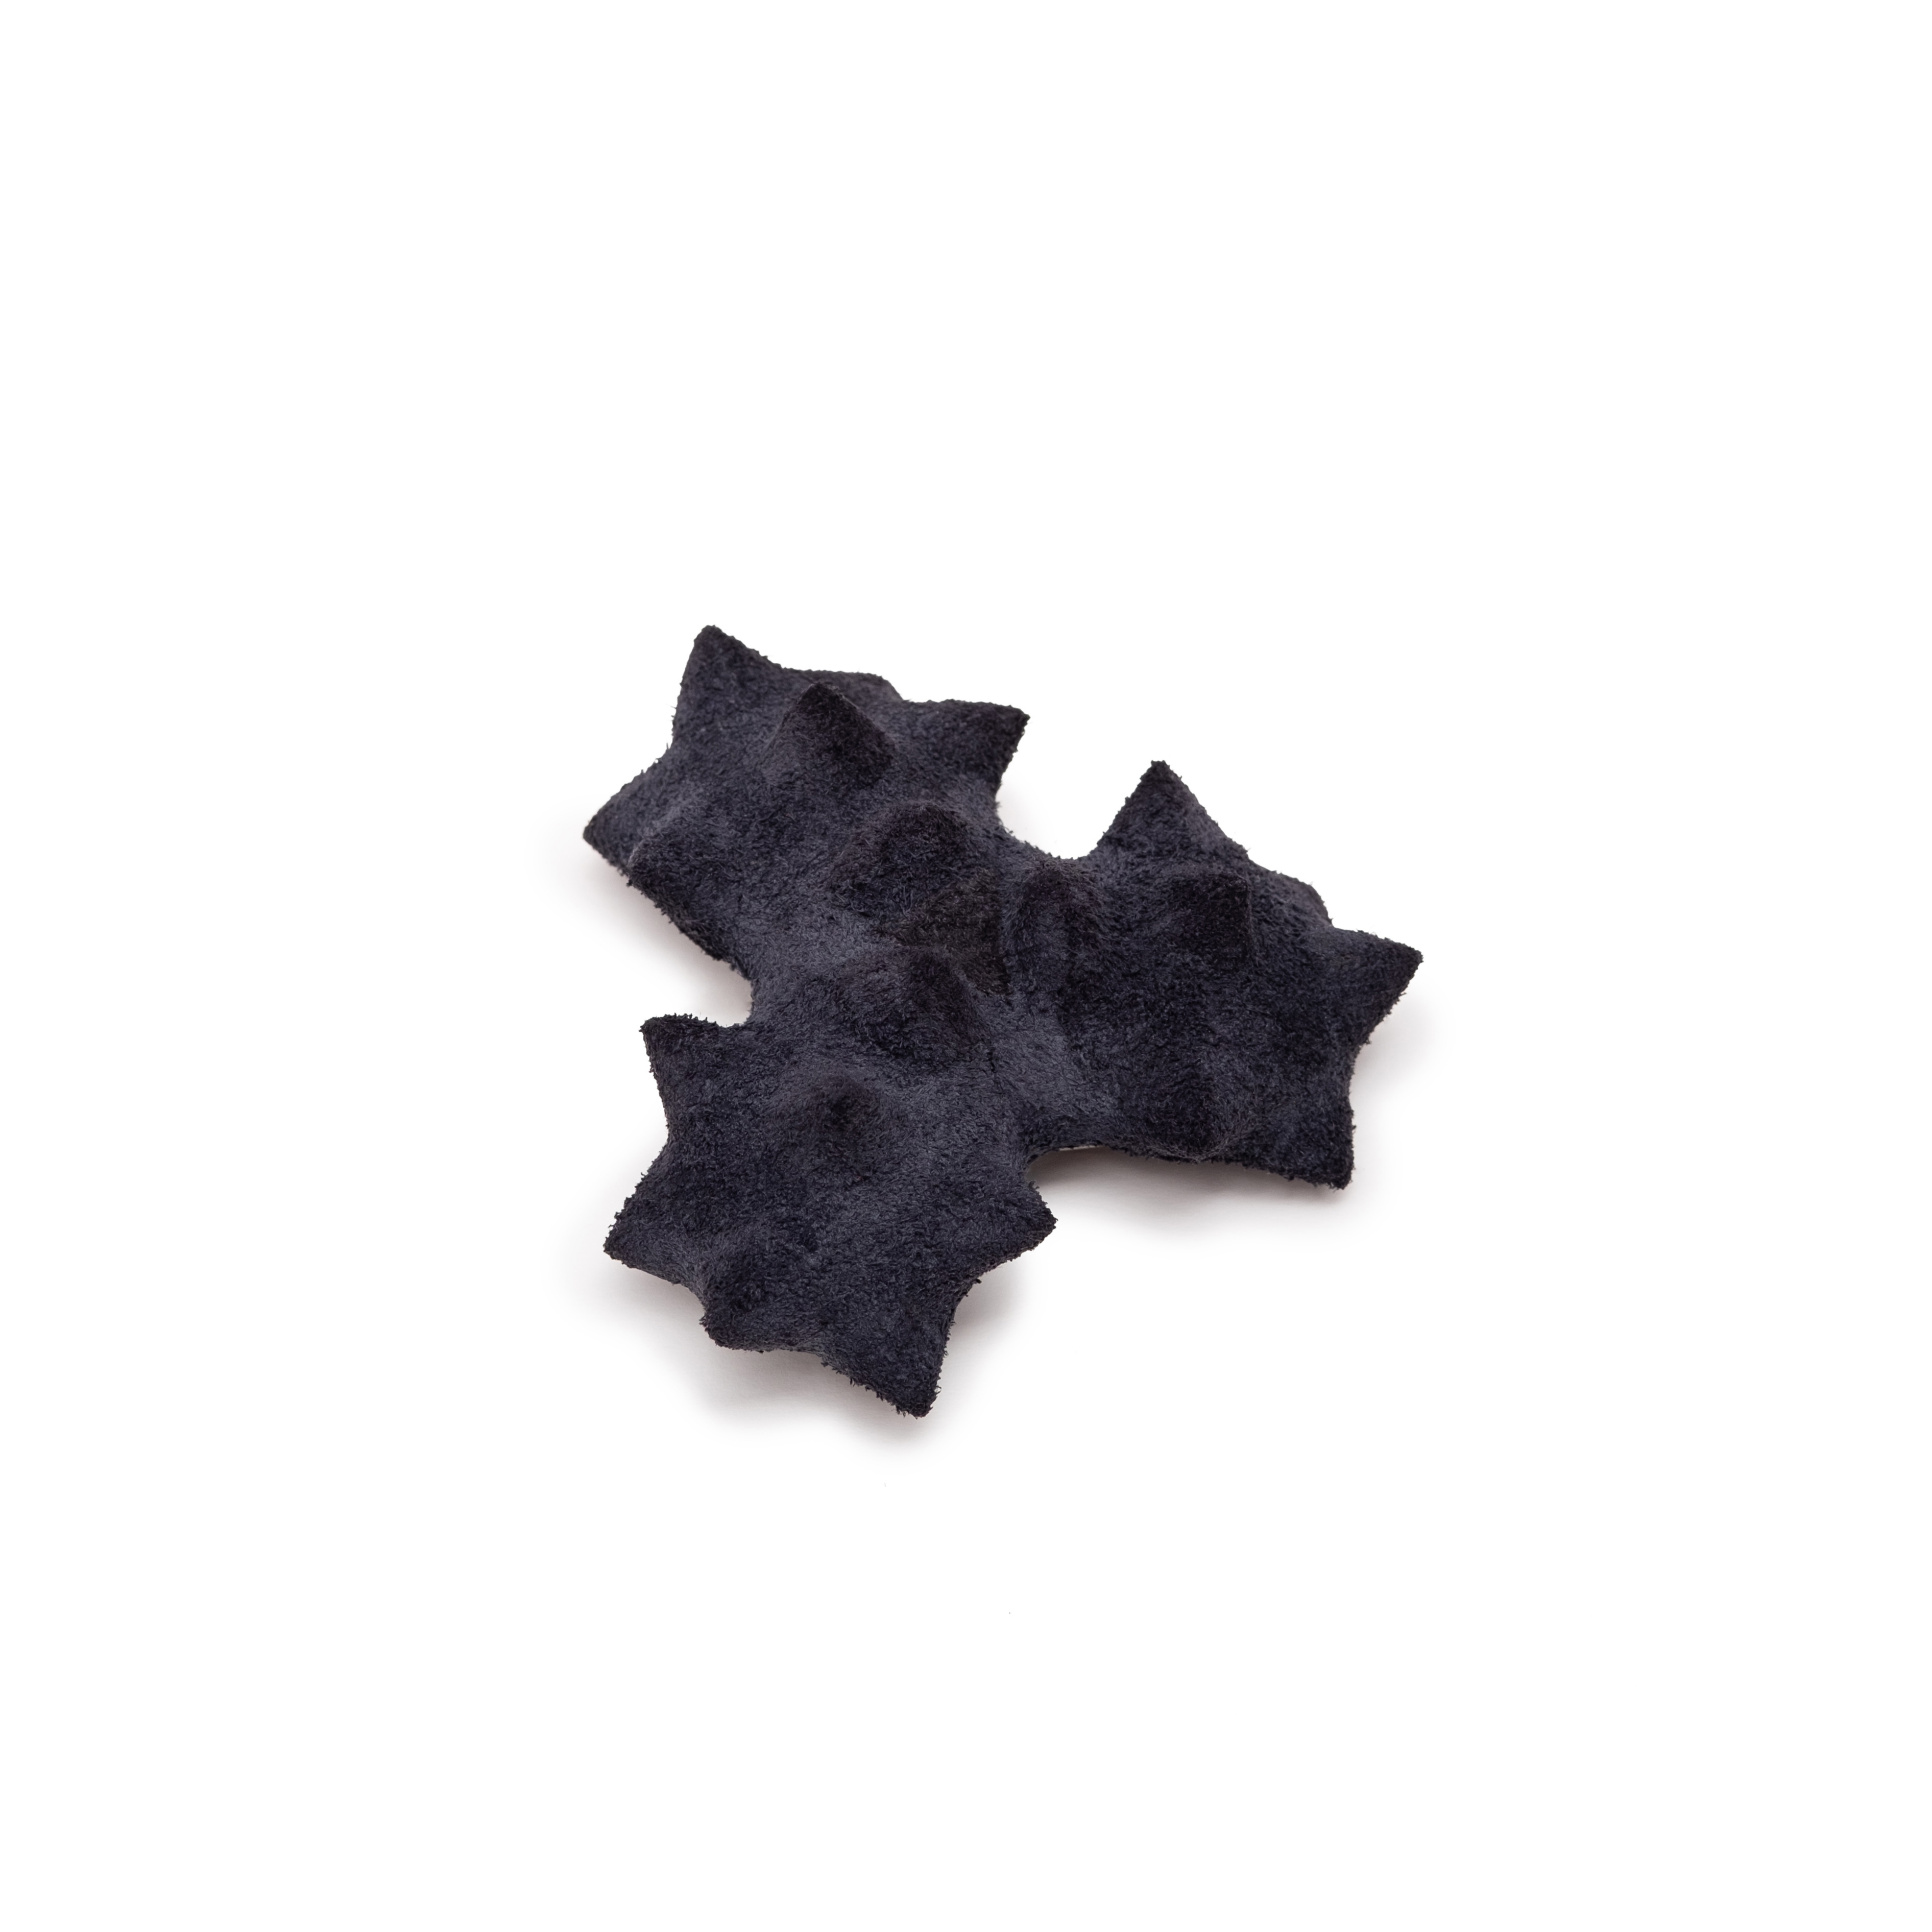 Superorder ′triangle′ leather brooch